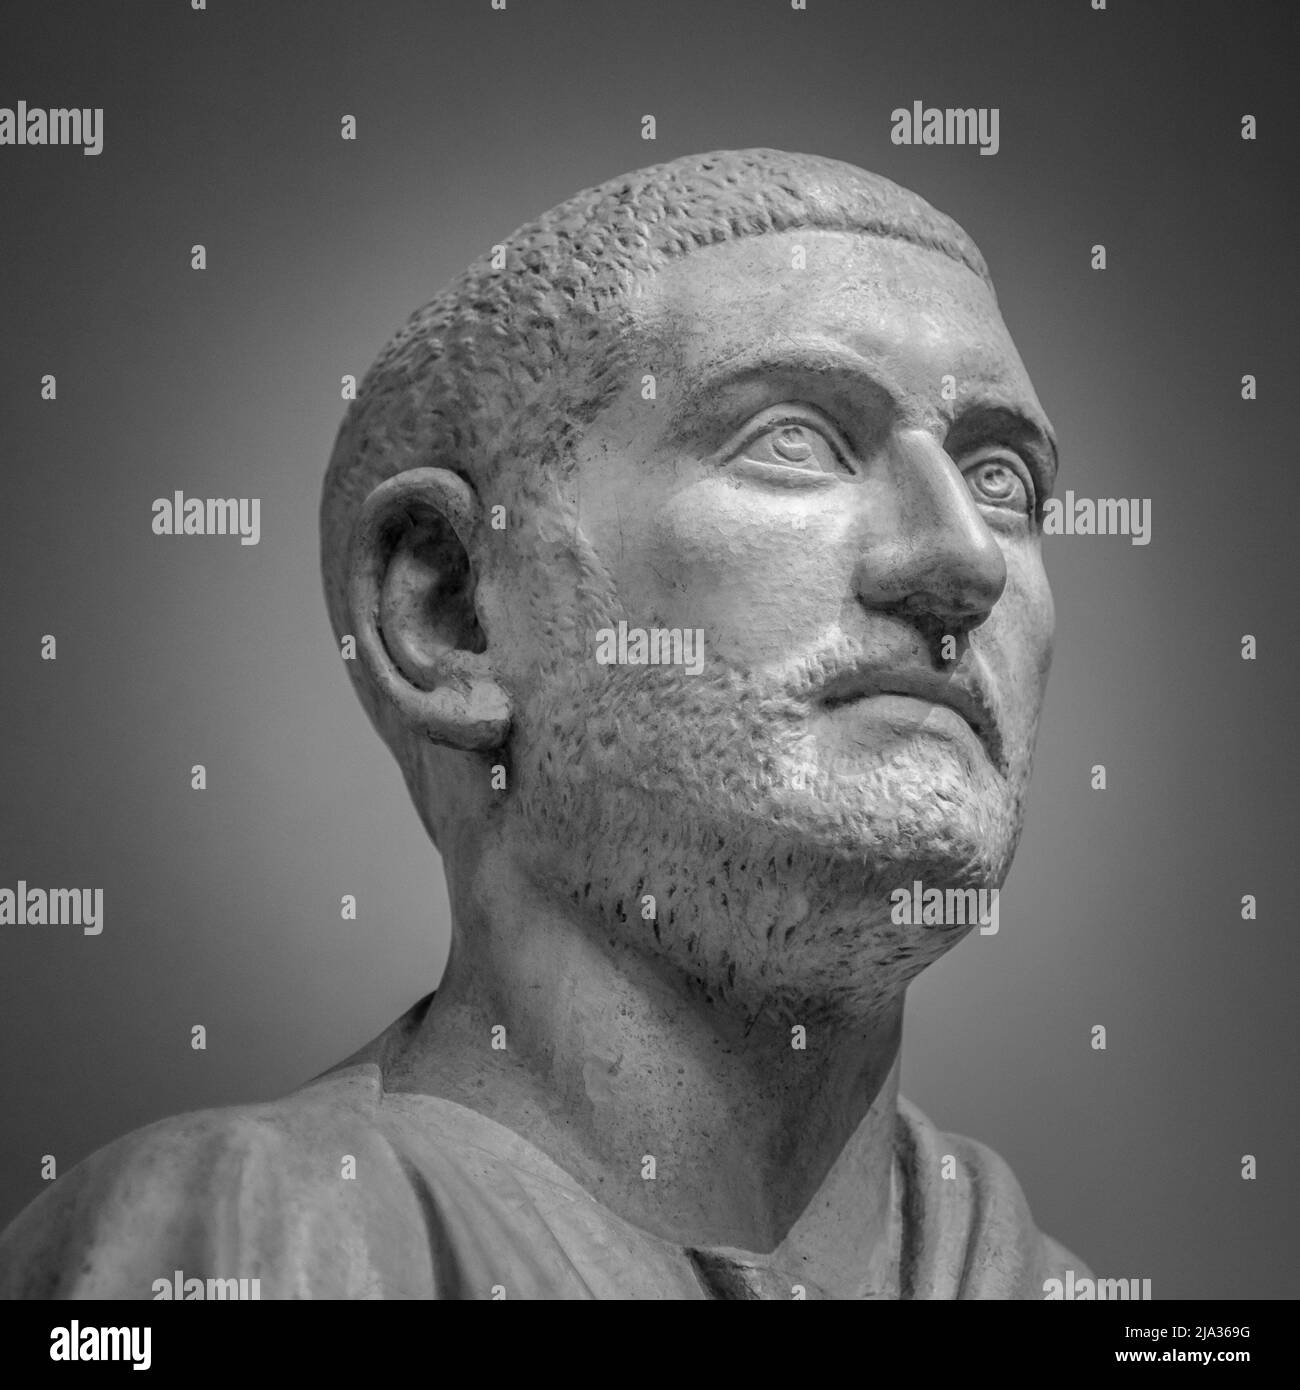 The ancient marble head of man sculpture. Stock Photo